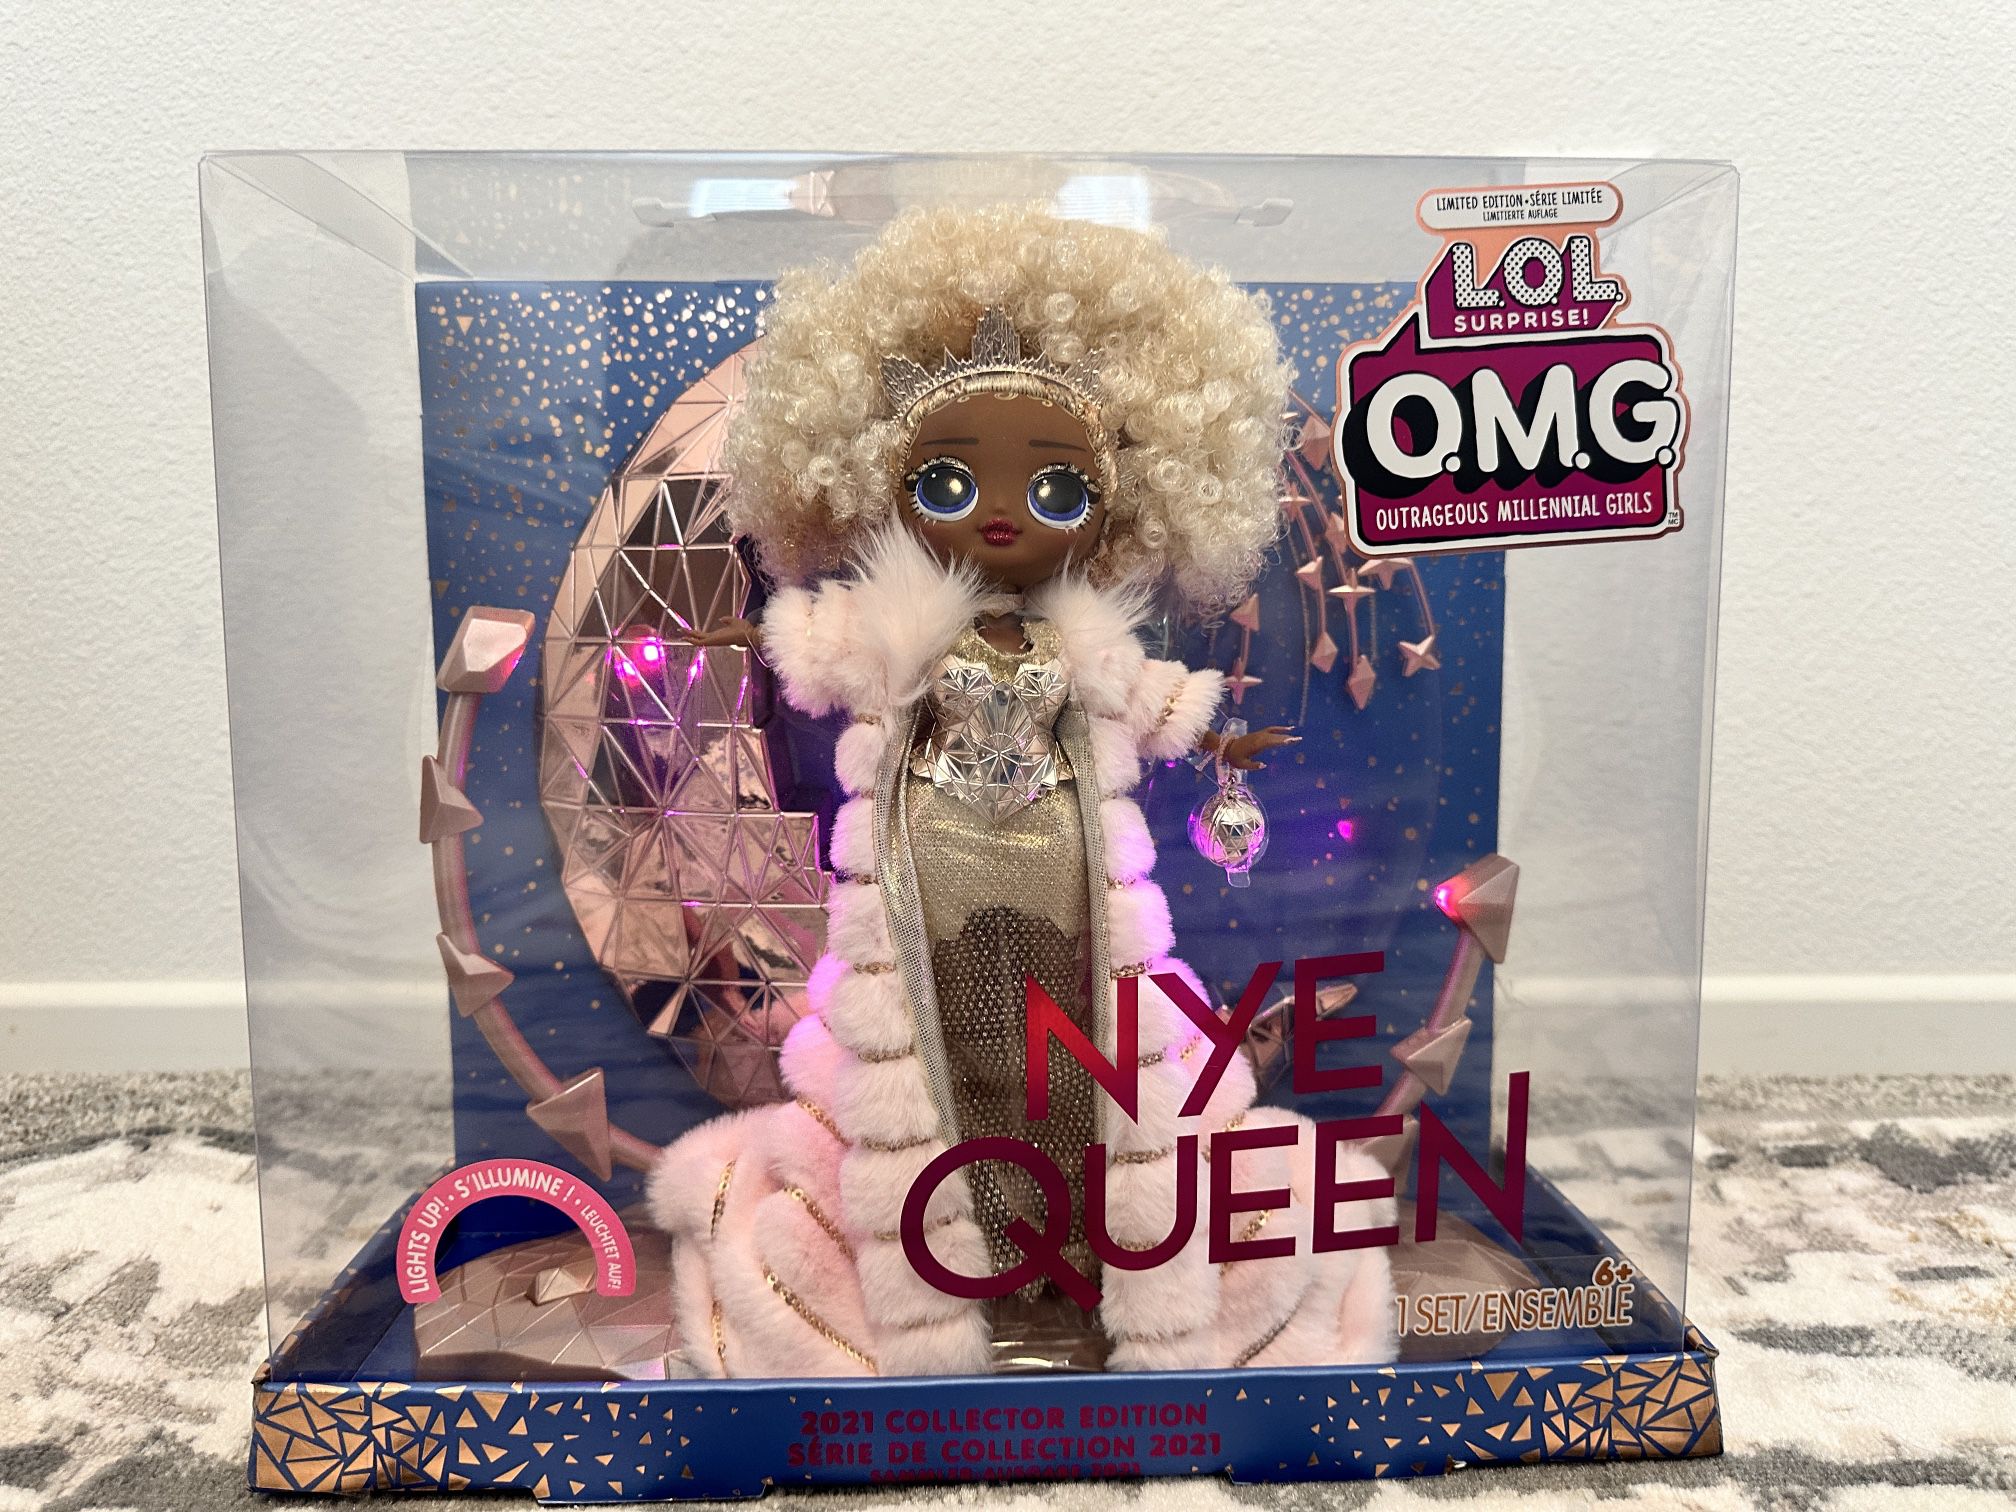 L.O.L. Surprise! Holiday OMG 2021 Collector NYE Queen Fashion Doll with Gold Fashions, Accessories, New Year's Celebration Outfit, Light Up Stand